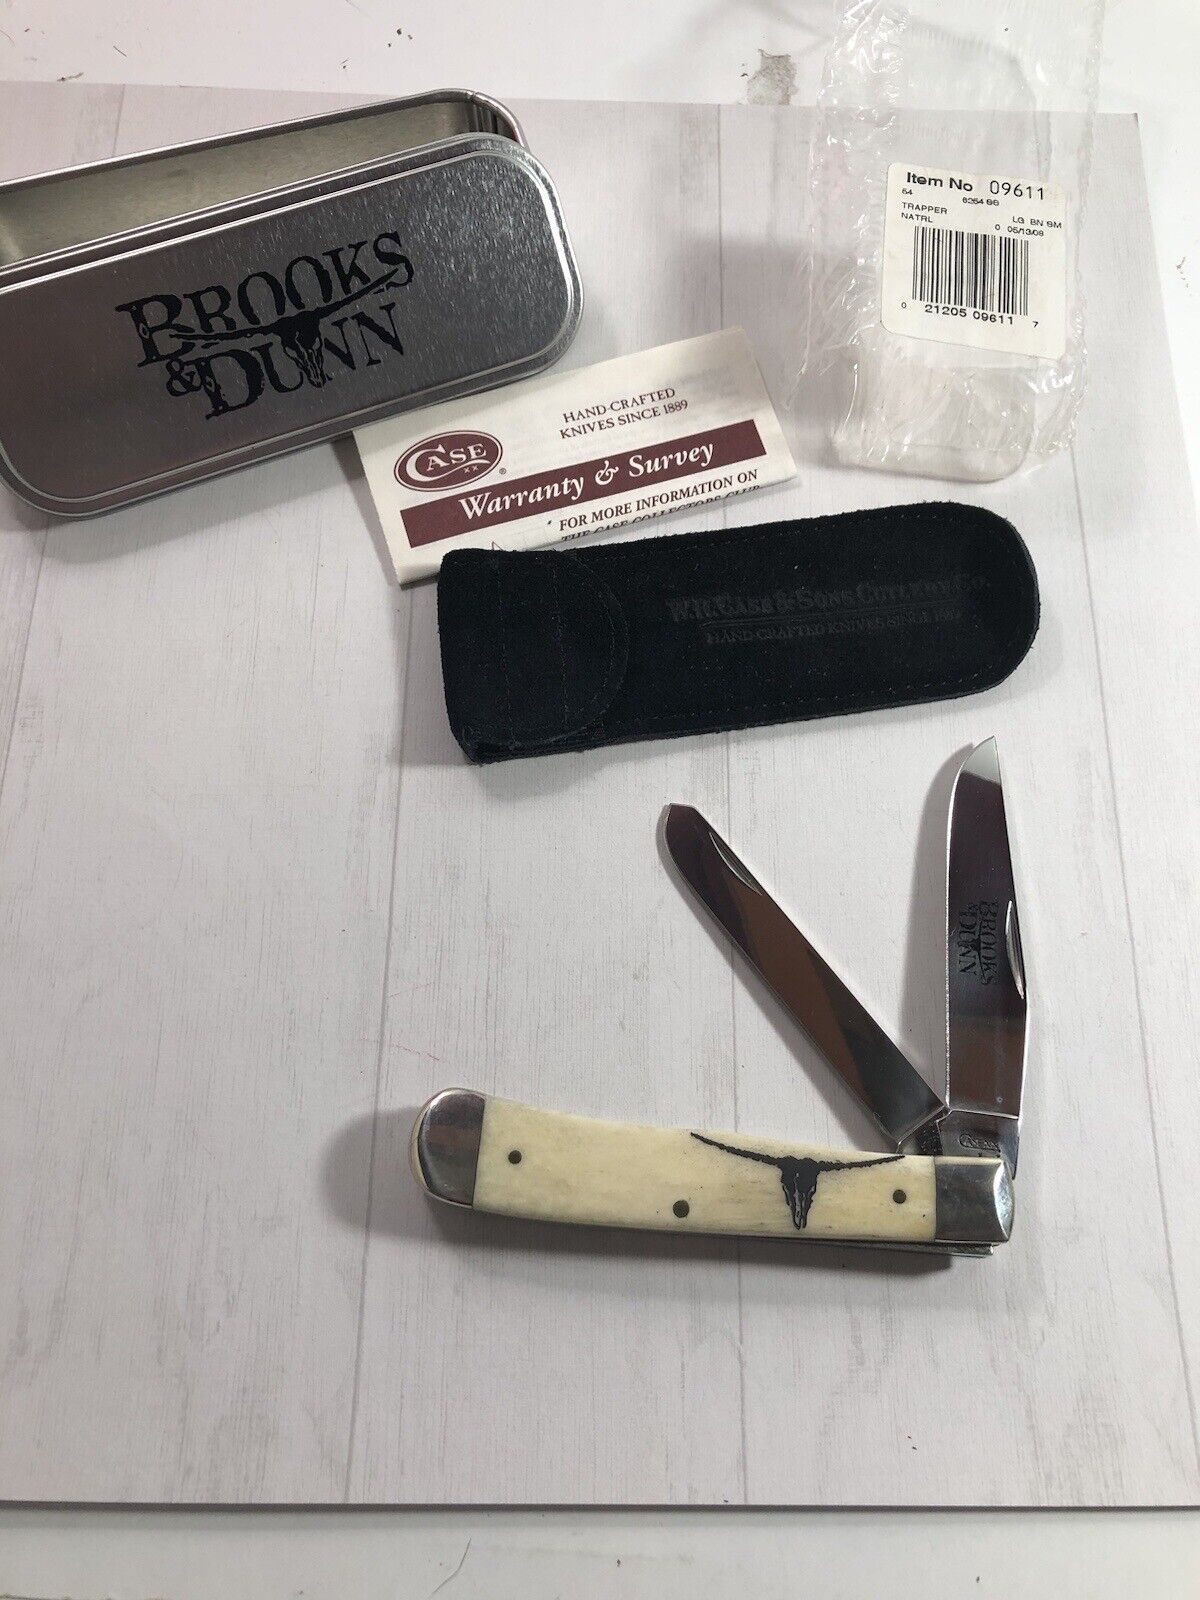 Case Knife BROOKS An DUNN Trapper Hand Crafted  # 21205  09611 NIB